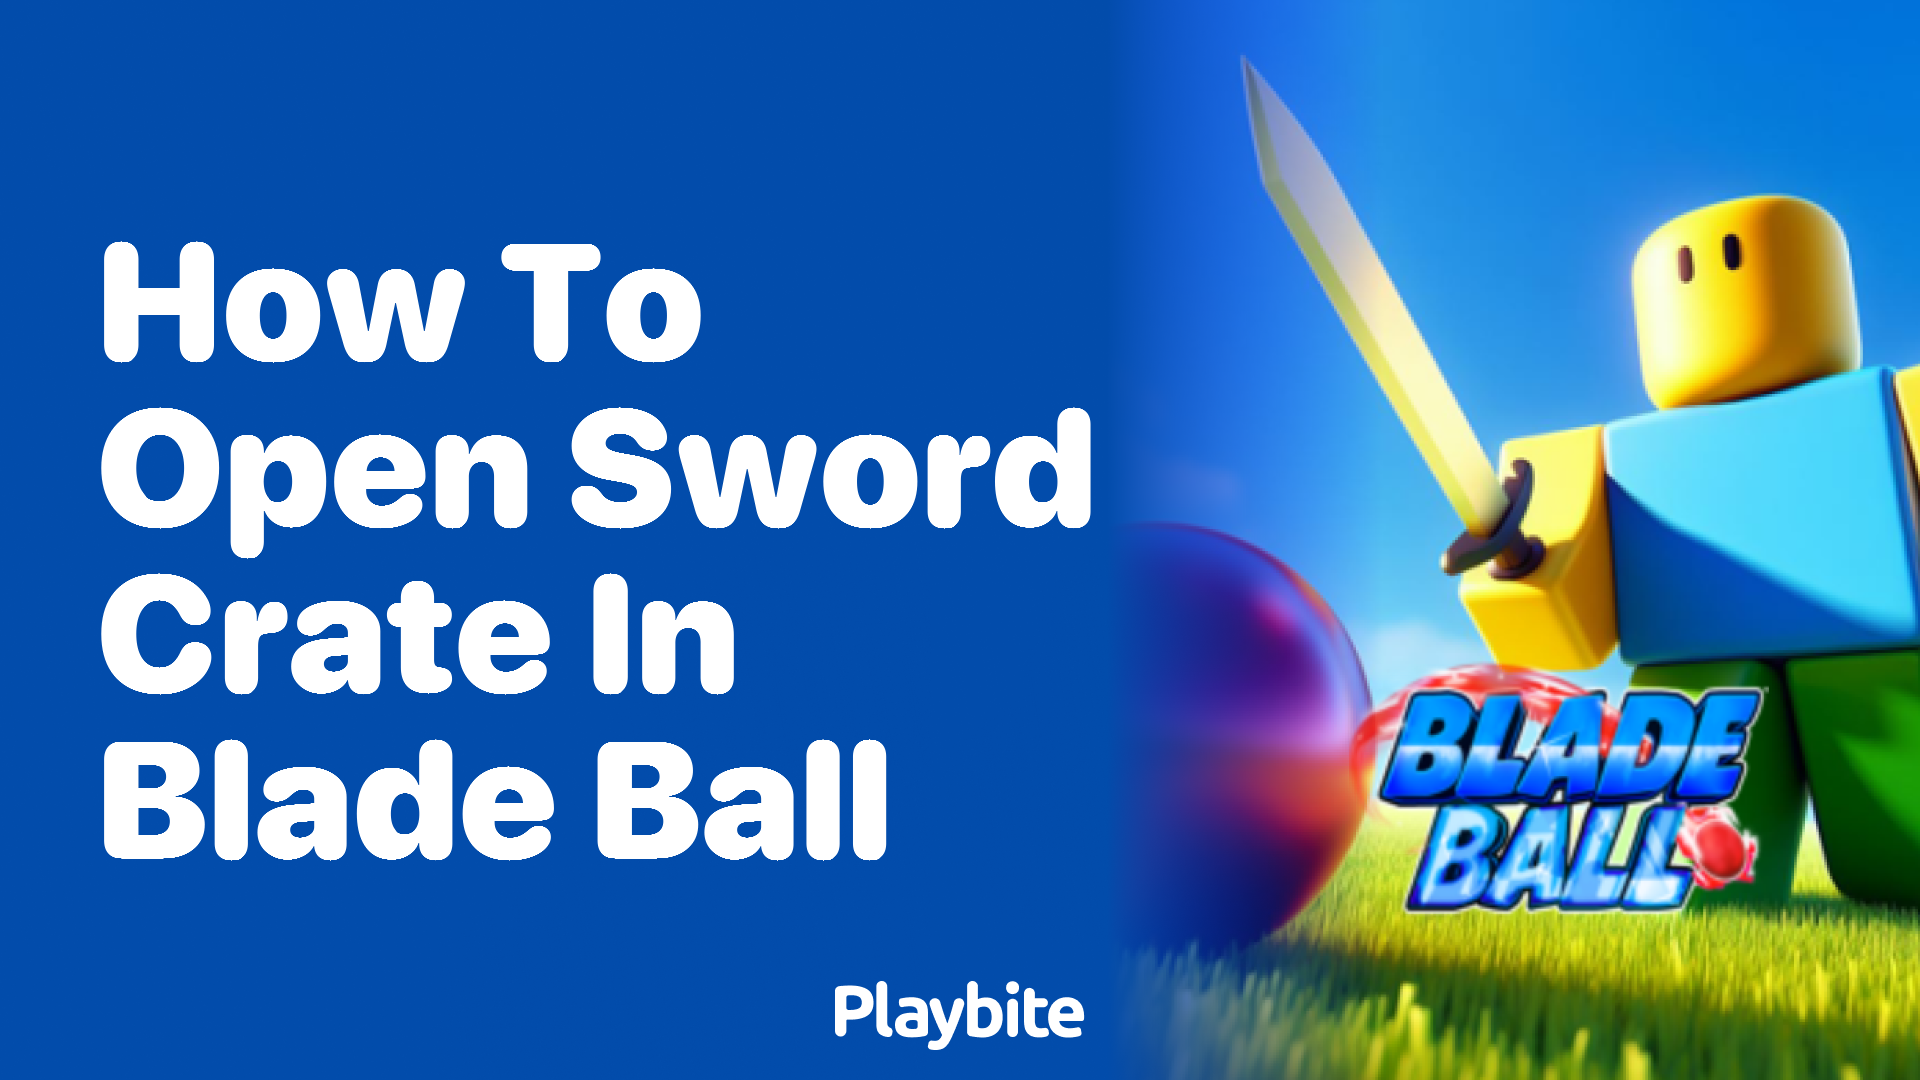 How to Open Sword Crate in Blade Ball: A Simple Guide